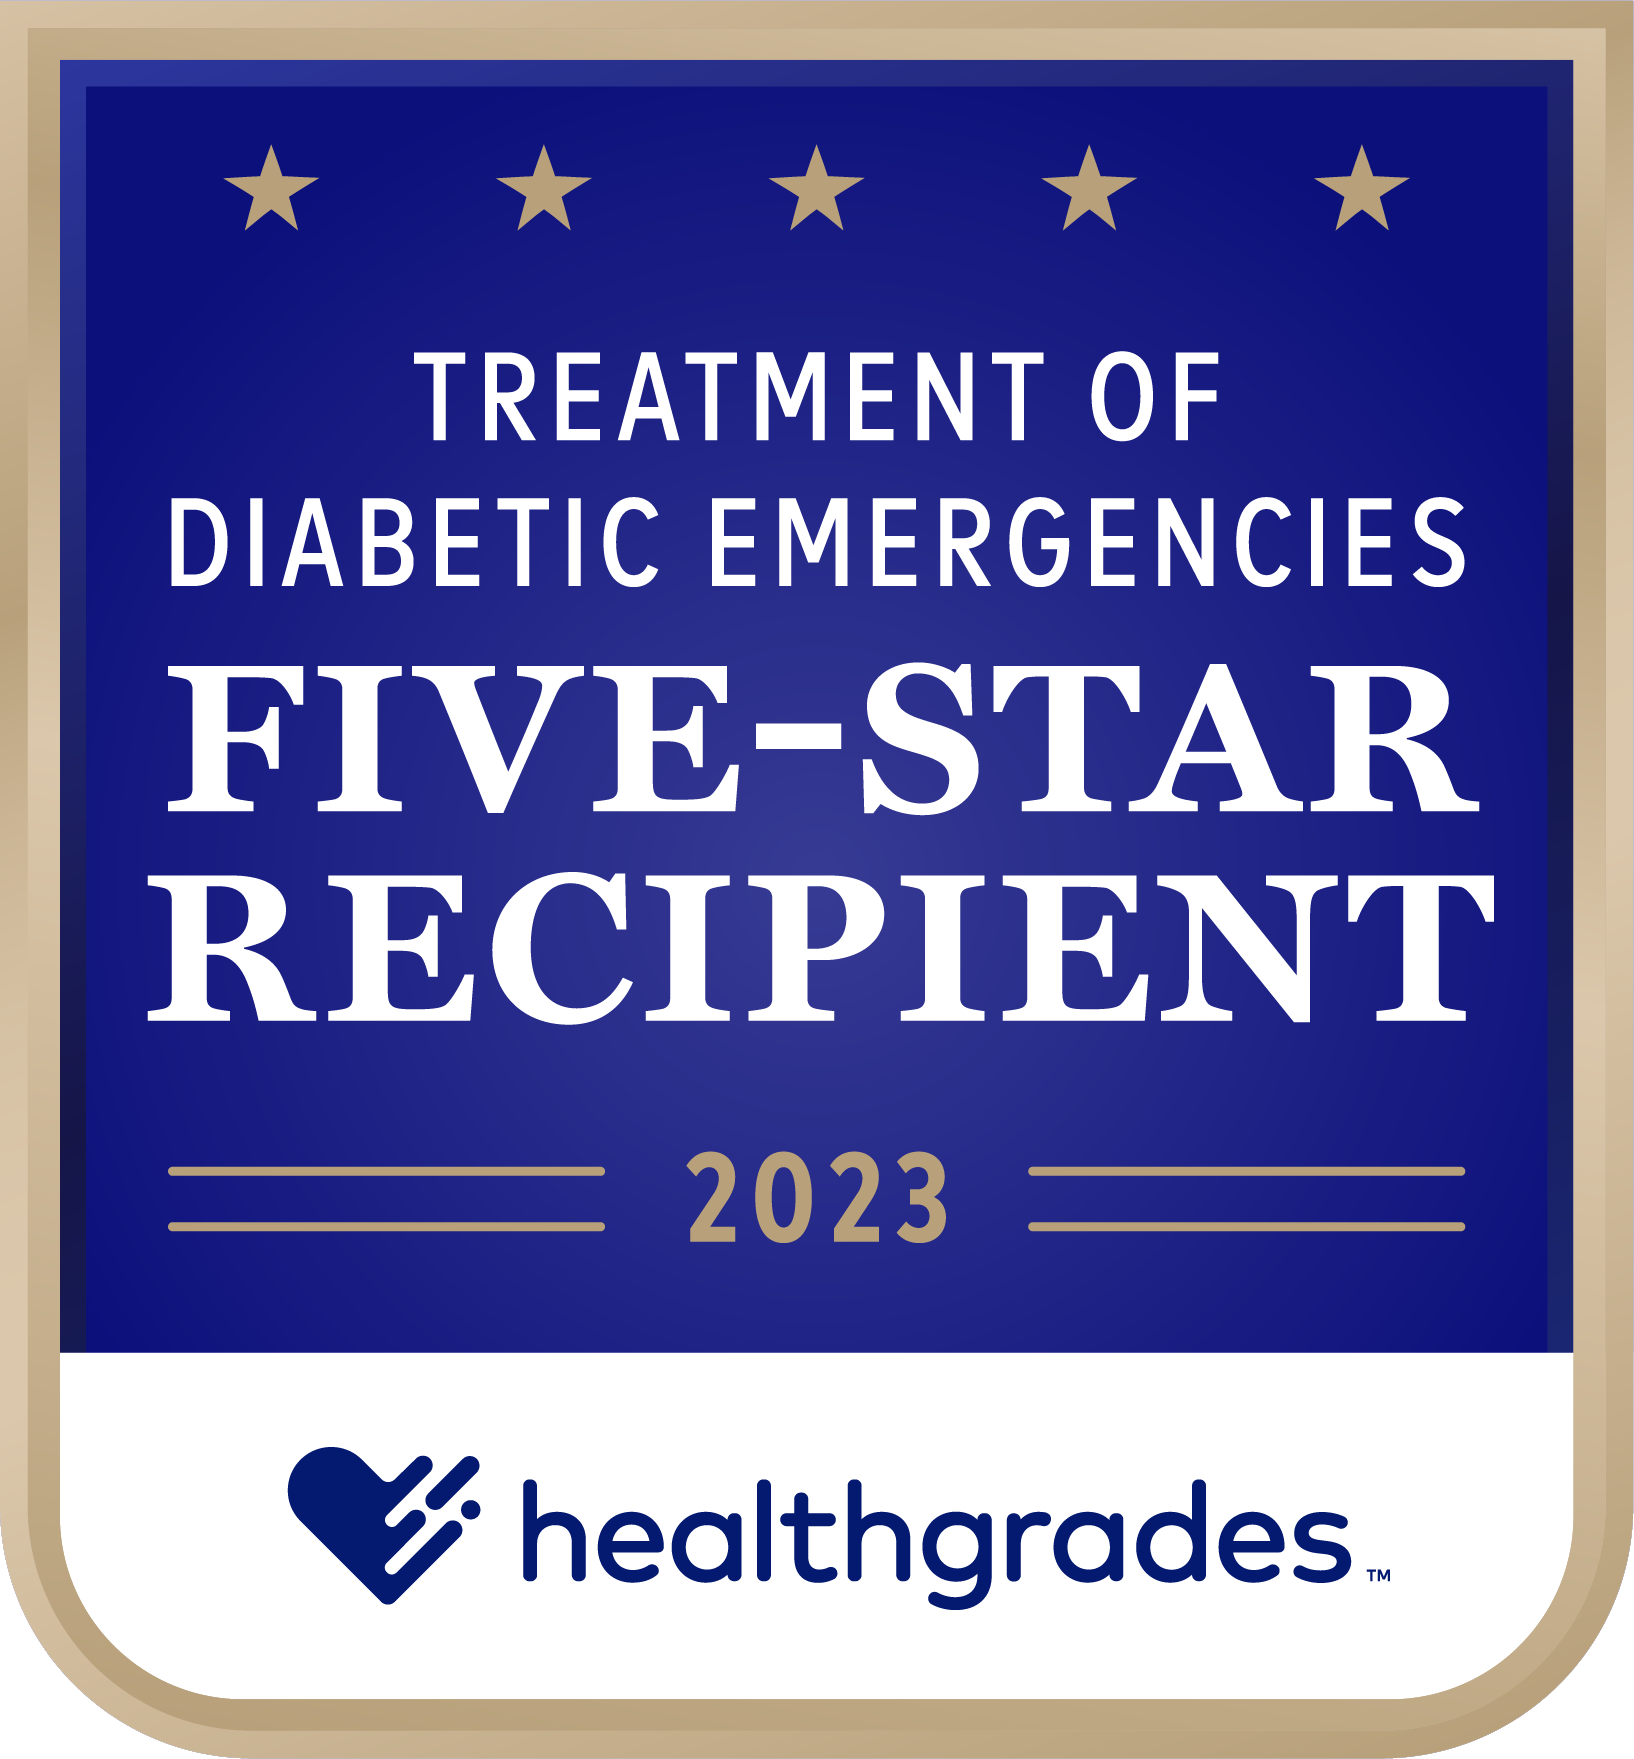 Pacemaker and Diabetic Emergencies Awards